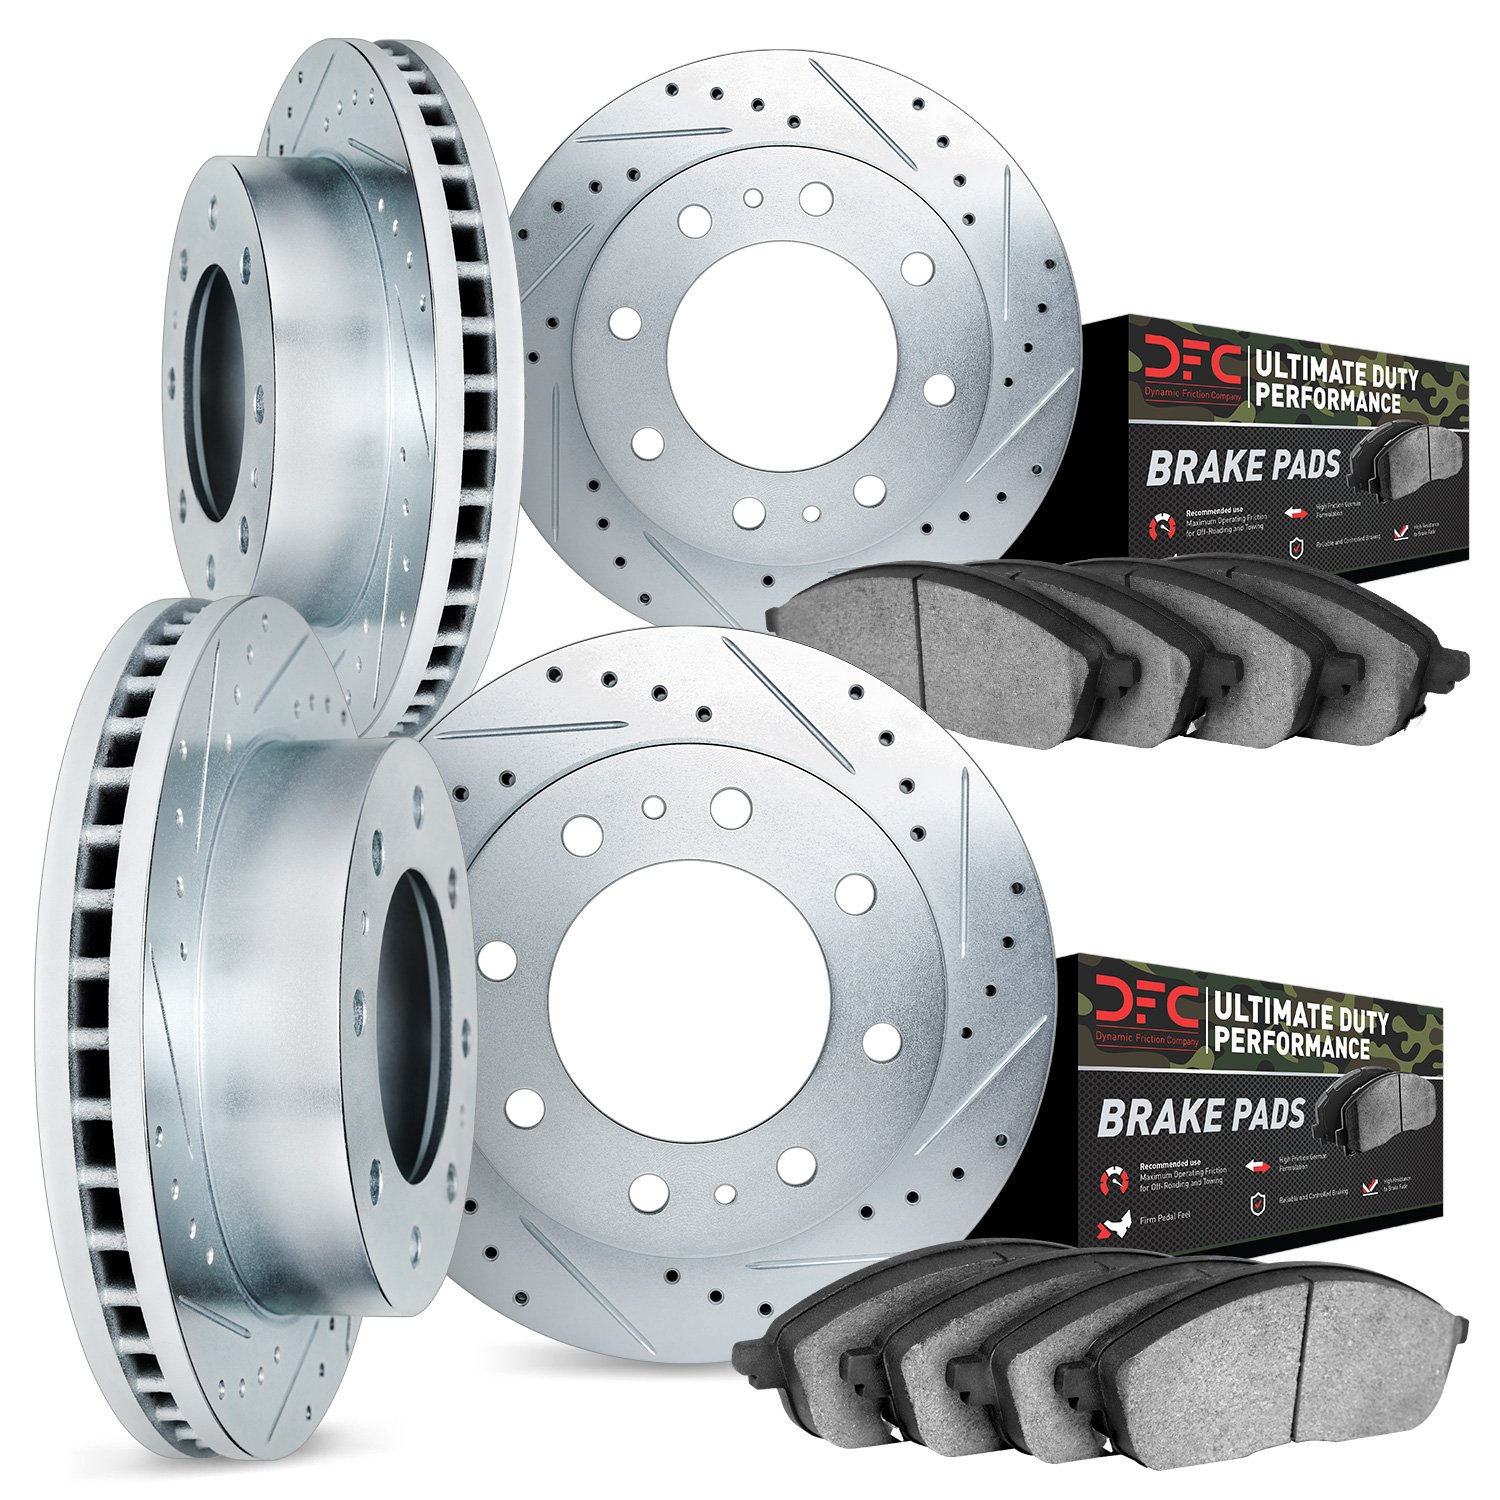 7404-48010 Drilled/Slotted Brake Rotors with Ultimate-Duty Brake Pads Kit [Silver], 2001-2003 GM, Position: Front and Rear